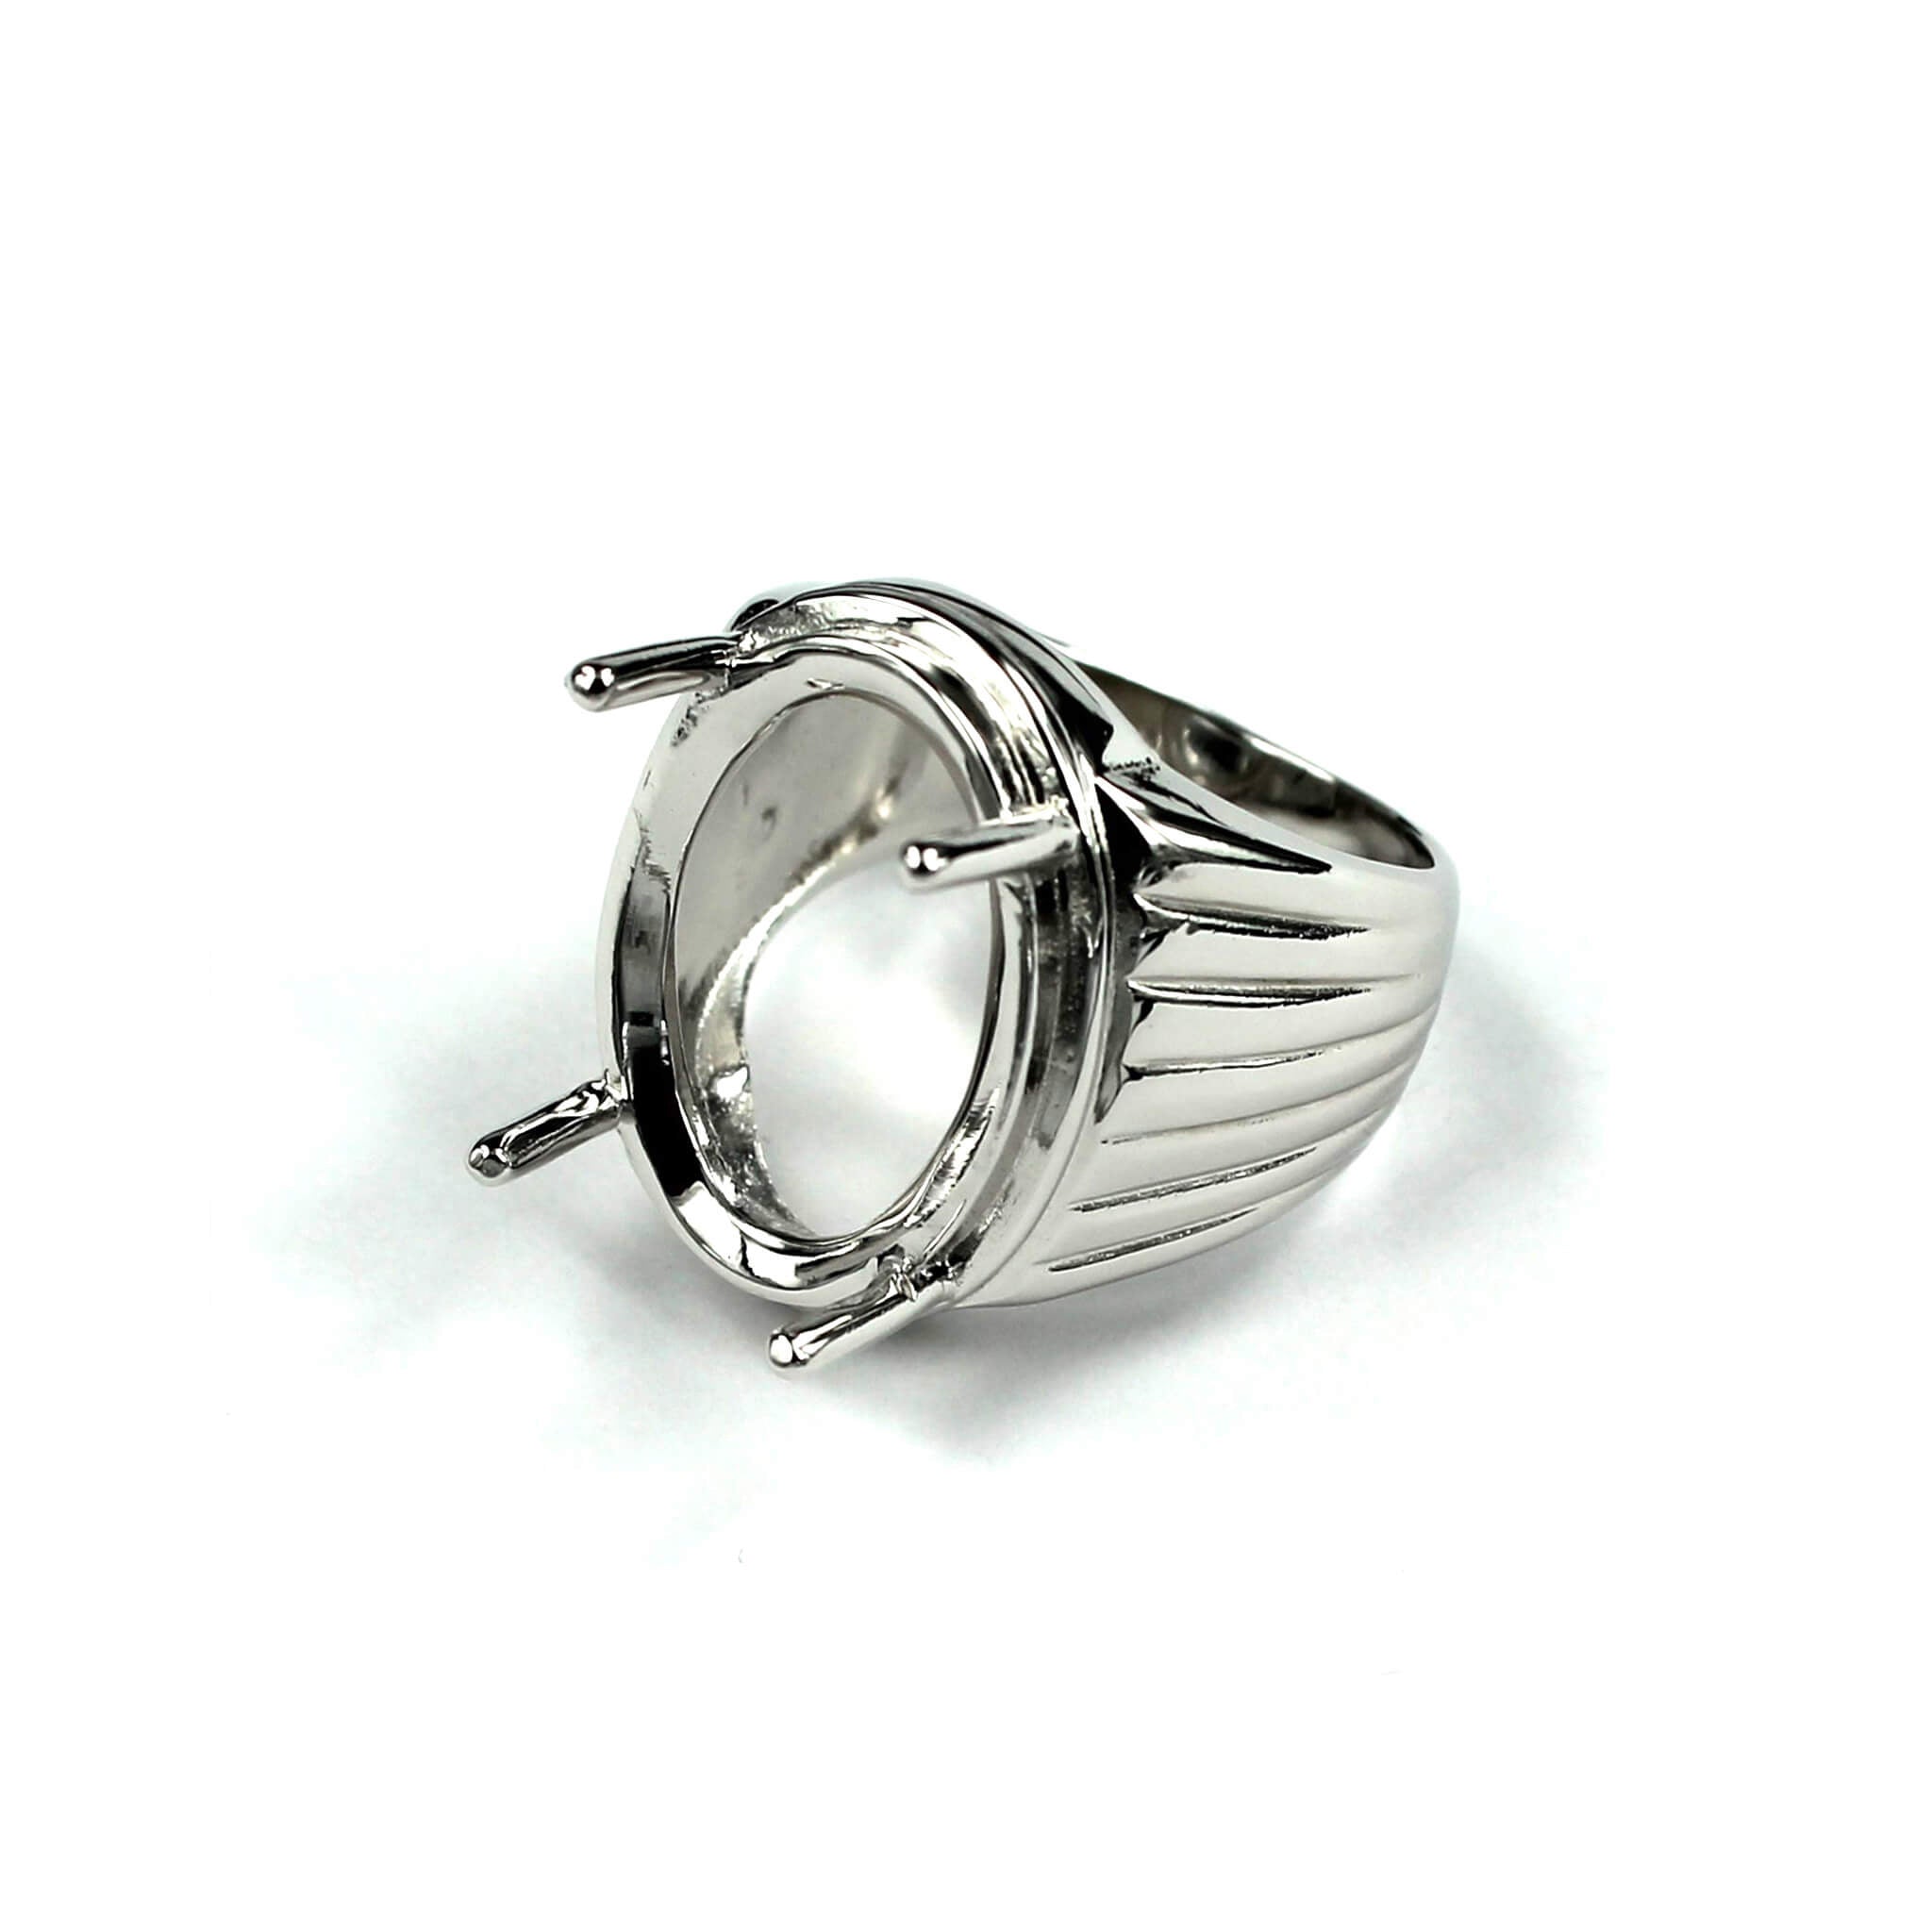 Patterned Ring with Oval Prongs Mounting in Sterling Silver 22x16mm